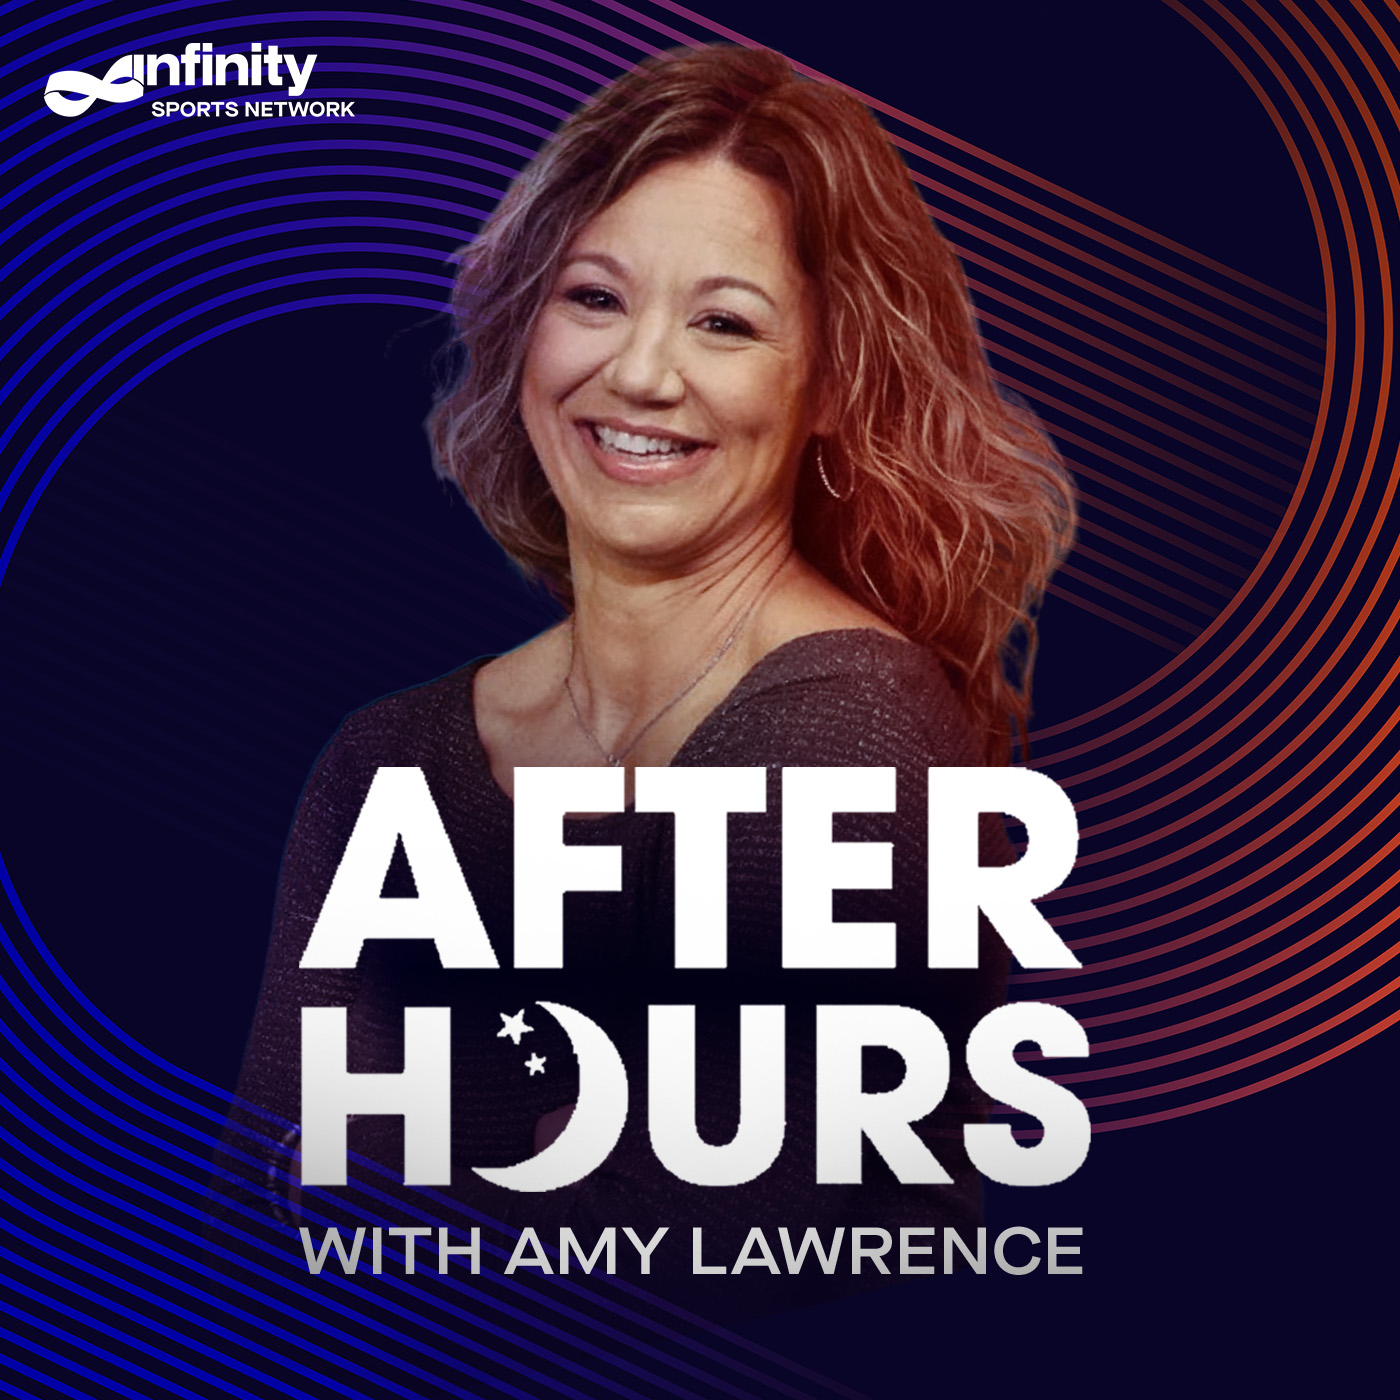 4/26/21 After Hours with Amy Lawrence PODCAST: Hour 3